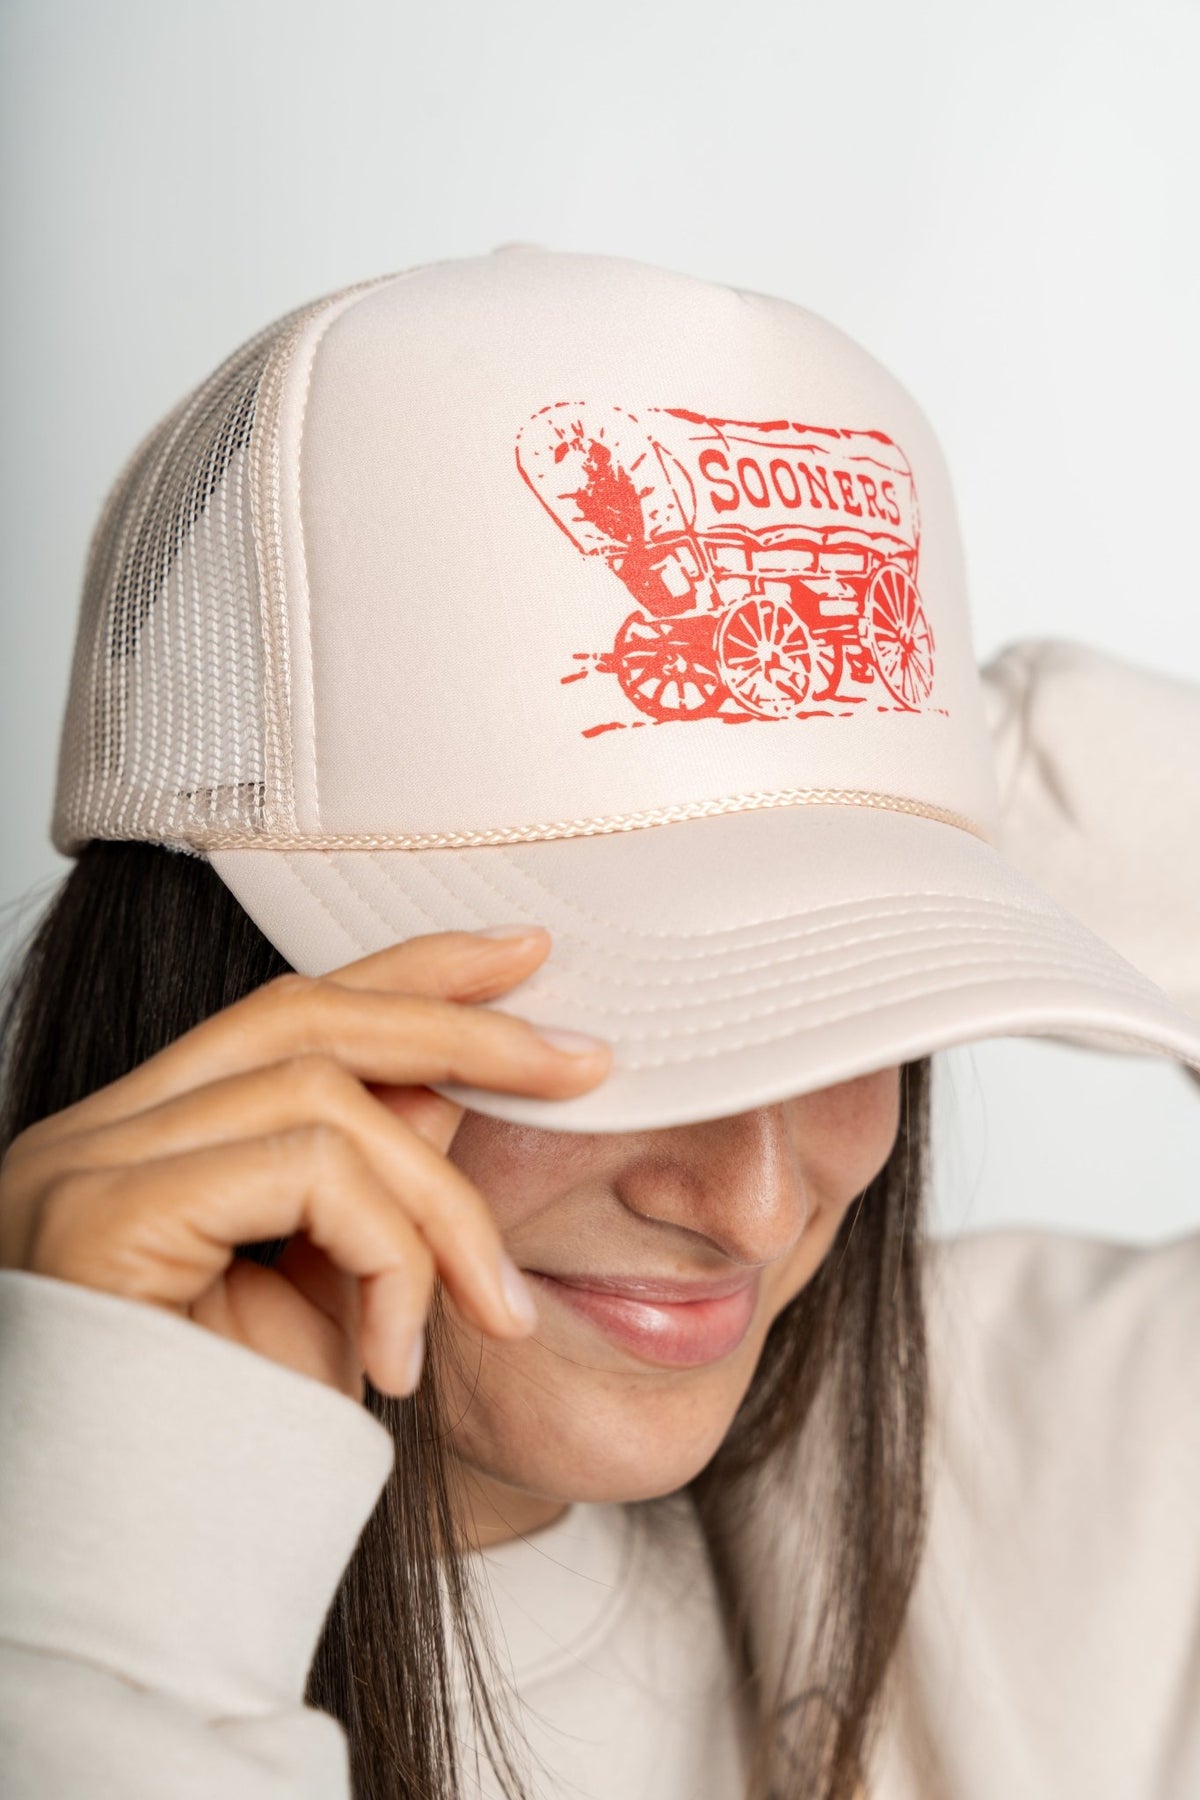 OU OU schooner simple trucker hat natural Hats Natural | Lush Fashion Lounge Trendy Oklahoma University Sooners Apparel & Cute Gameday T-Shirts